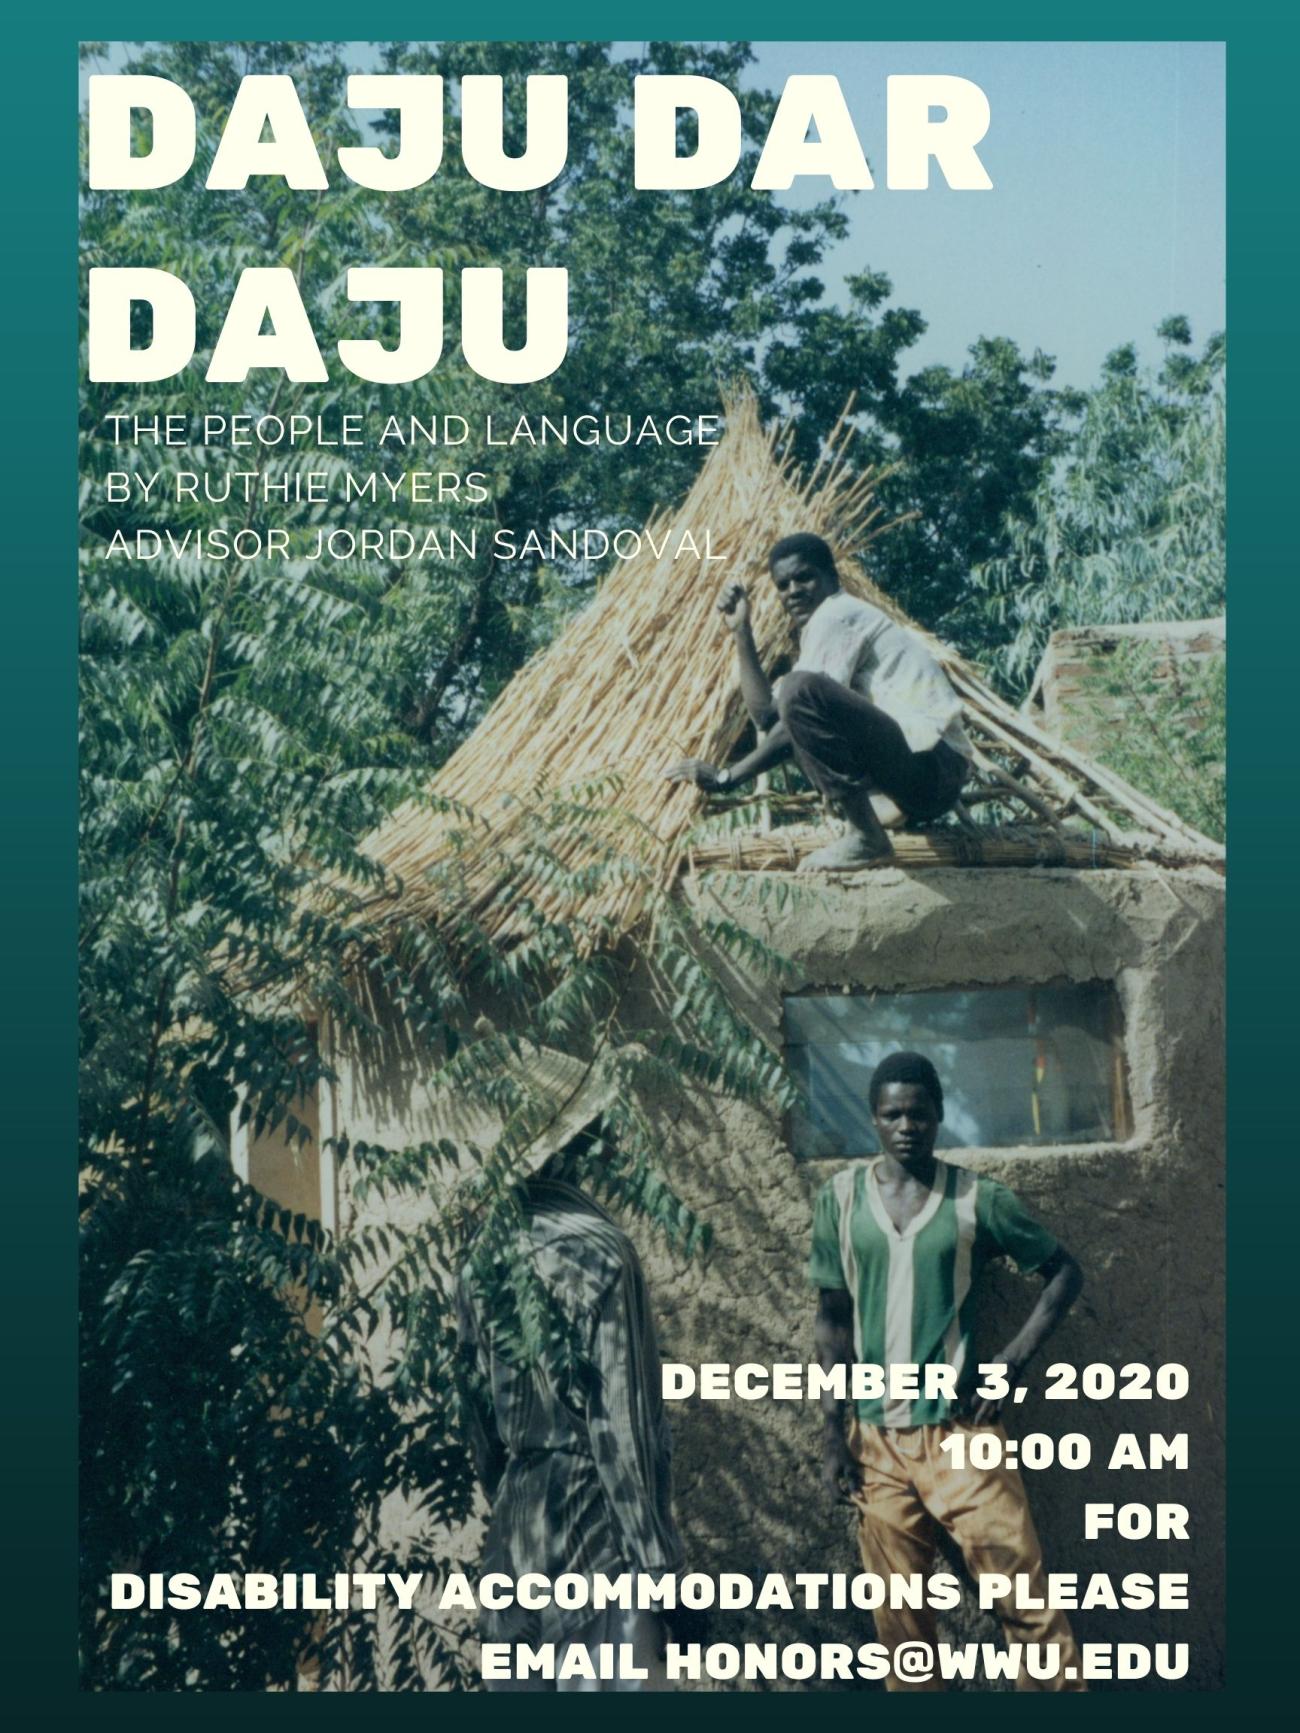 Image: Three people pose for a photo while building a thatched roof on a home in Mongo, Chad. Text: "Daju Dar Daju: The people and language. By Ruthie Myers. Advisor Jordan Sandoval. December 3, 2020 at 10:00 AM. For disability accomodations, please email honors@wwu.edu"